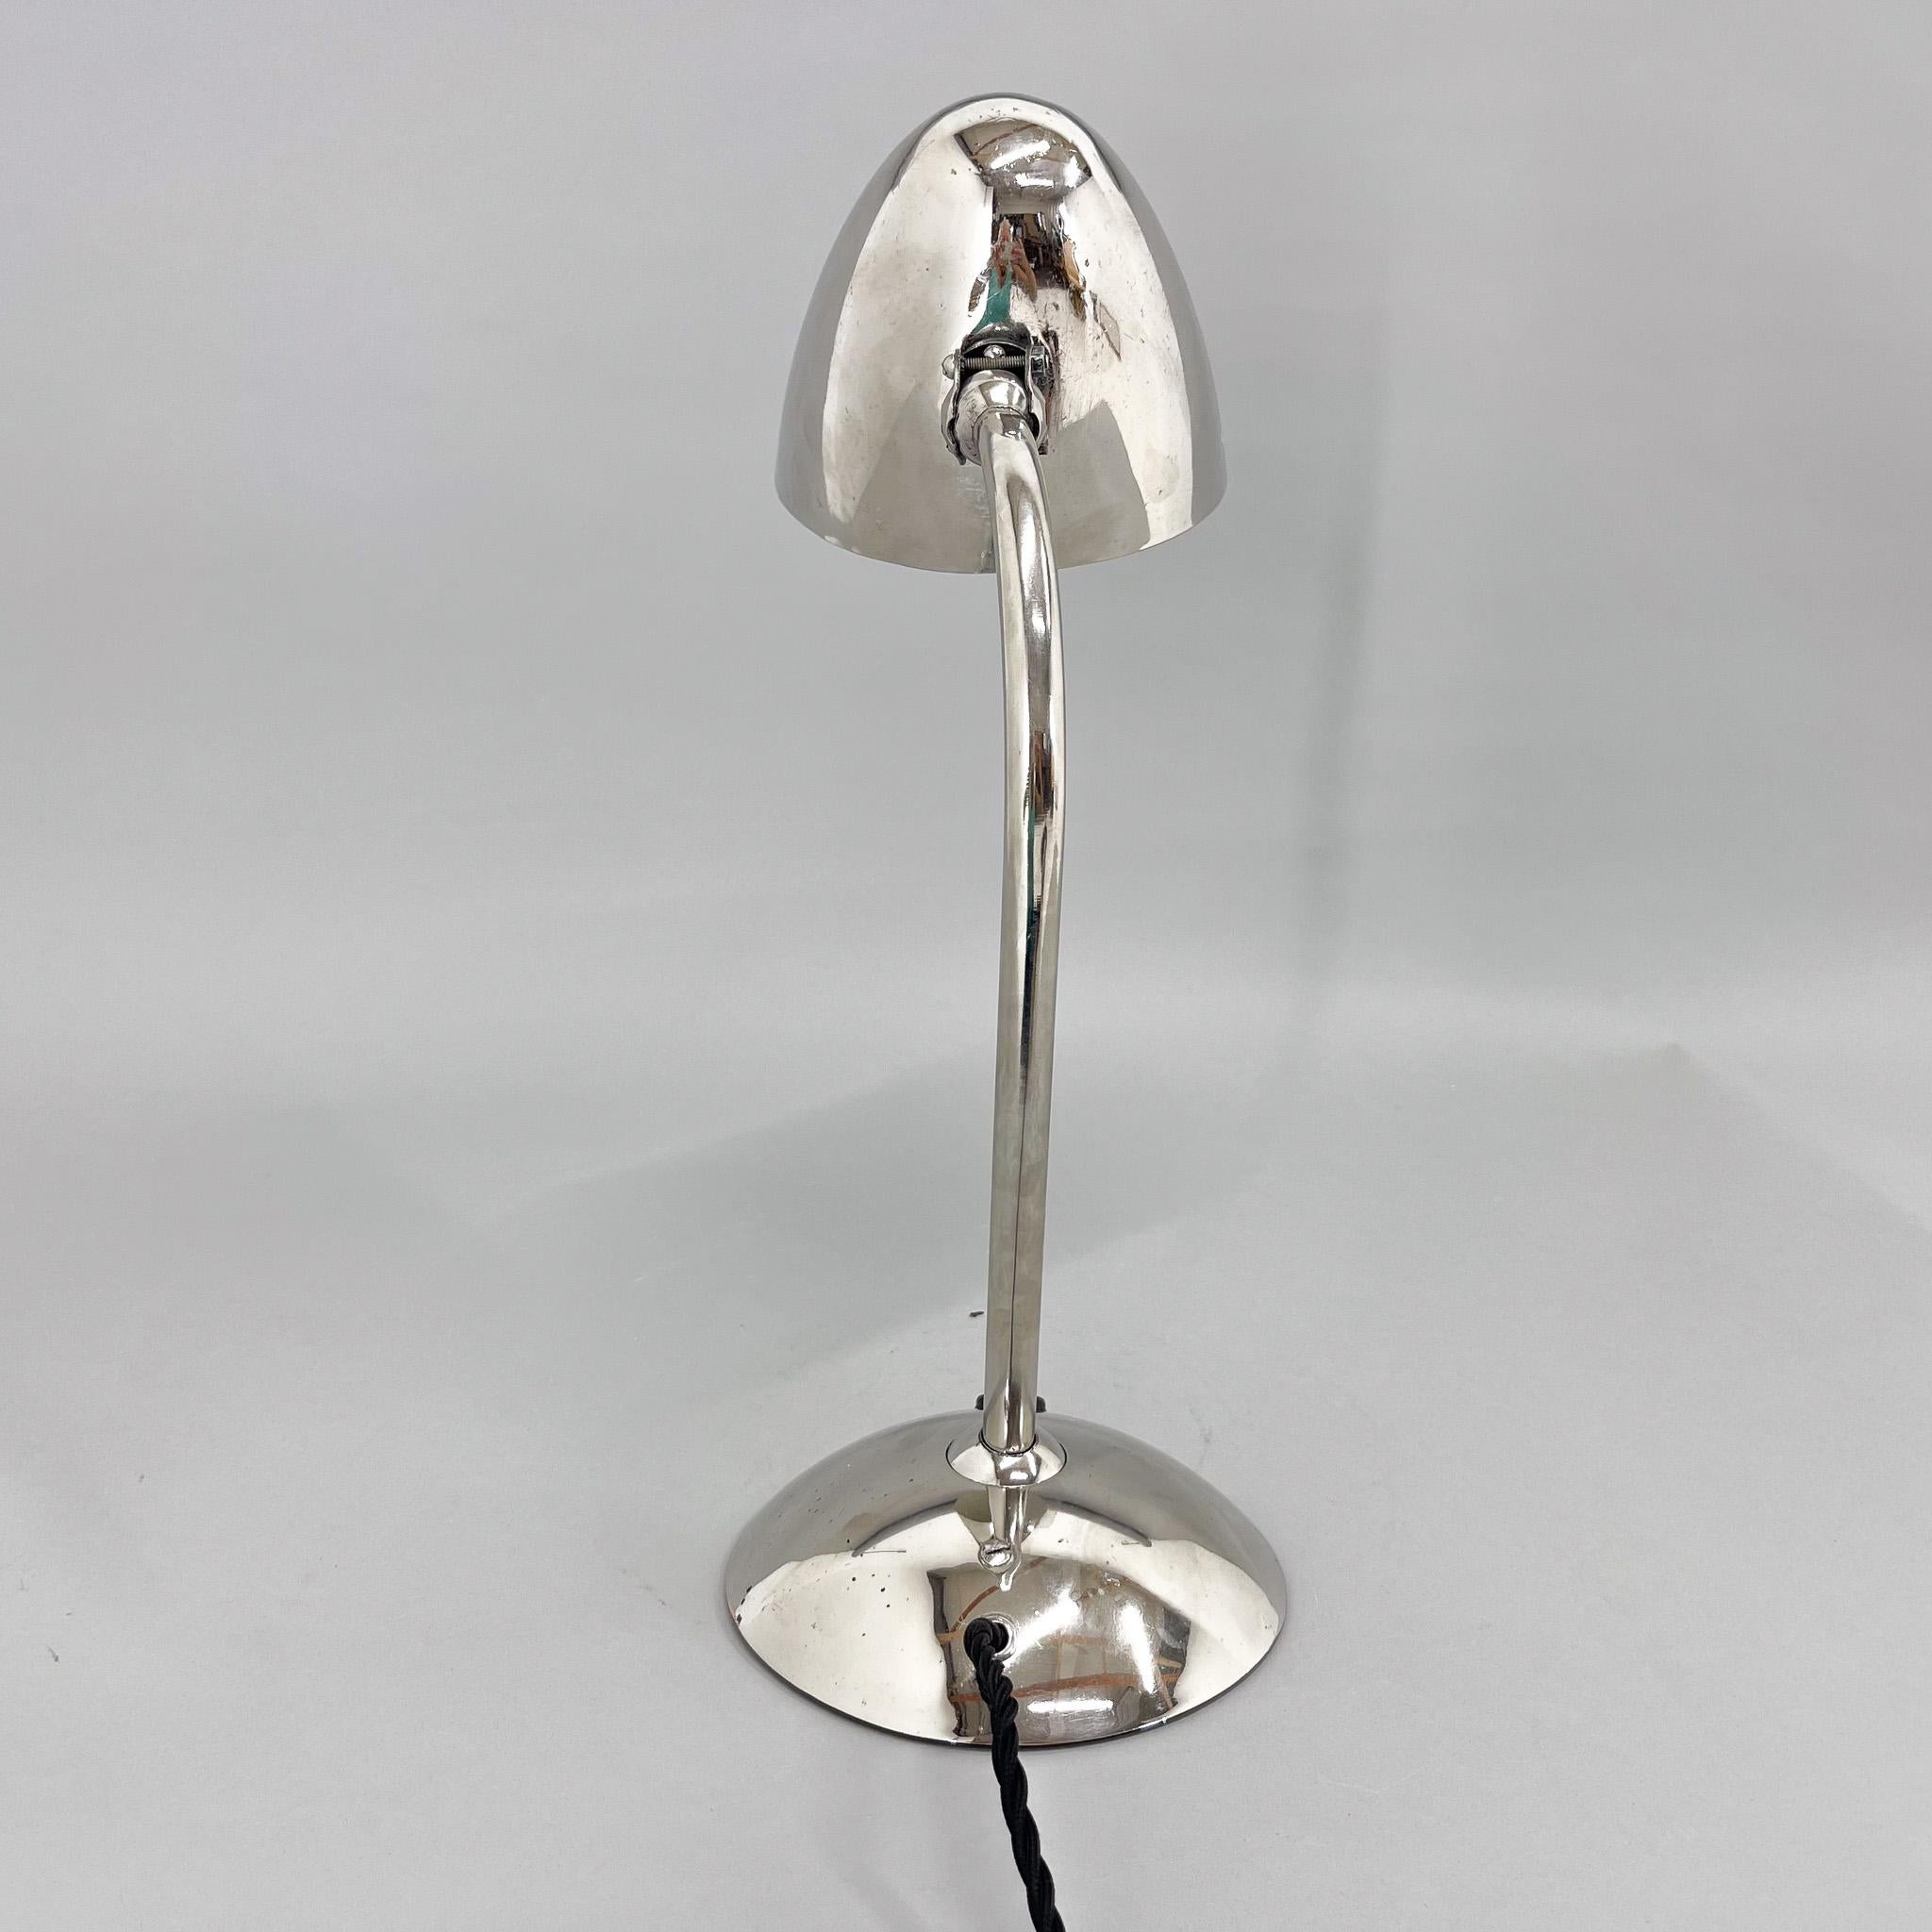 Functionalist / Bauhaus Flexible Table Lamp by Franta Anyz, 1930s For Sale 4